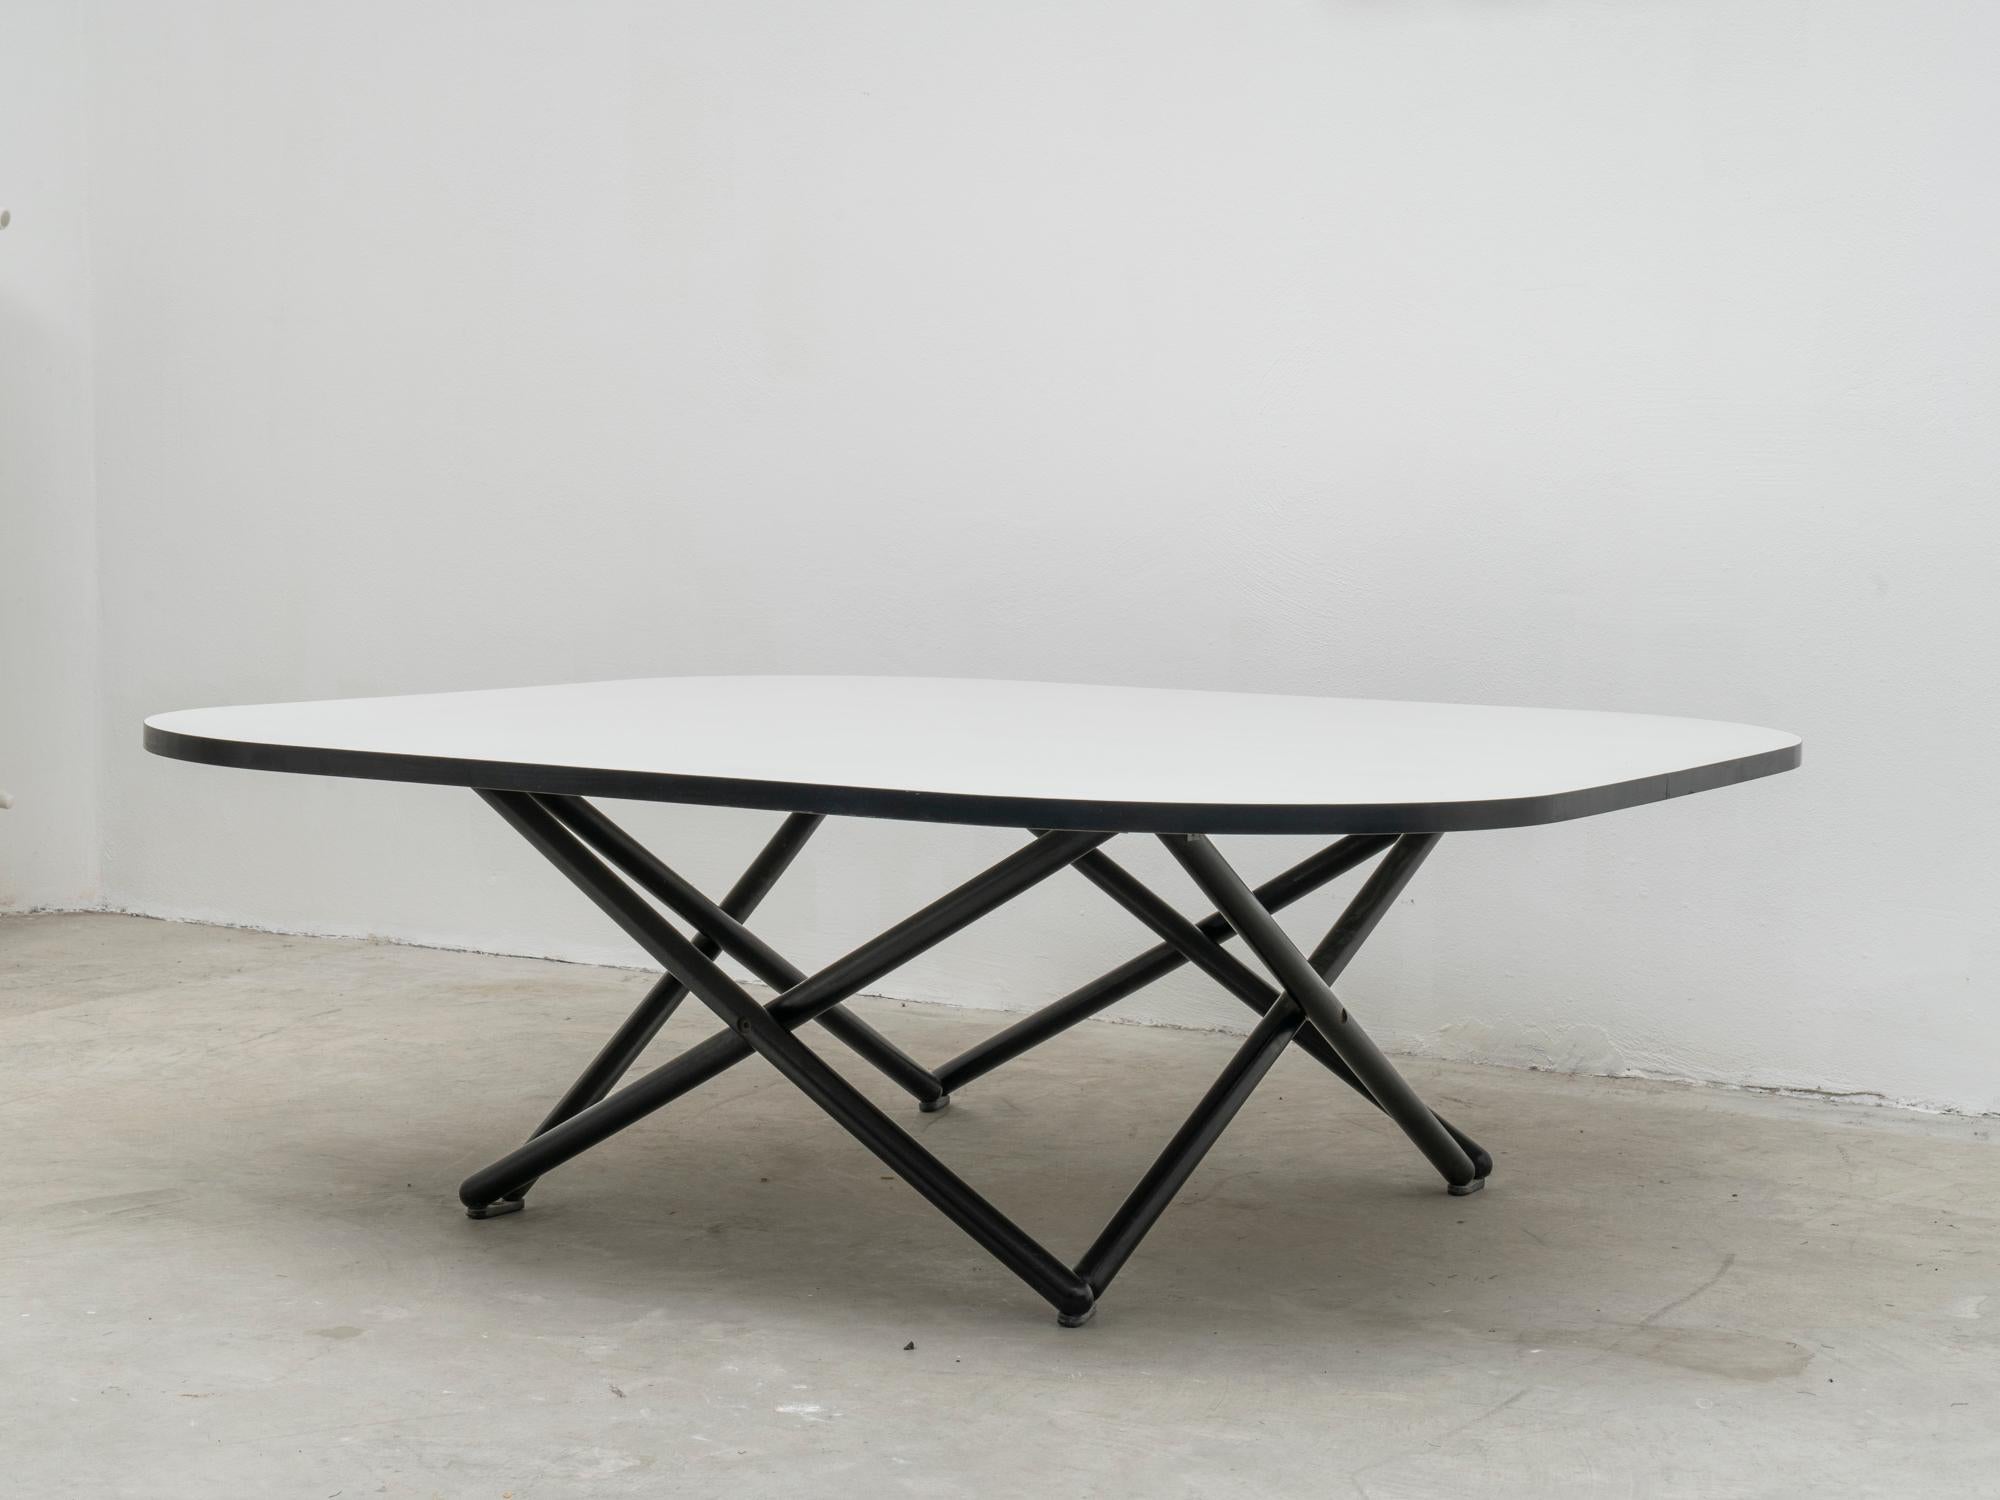 This large coffee or center table was design by Italian architect Vico Magistretti. It belogs to the 